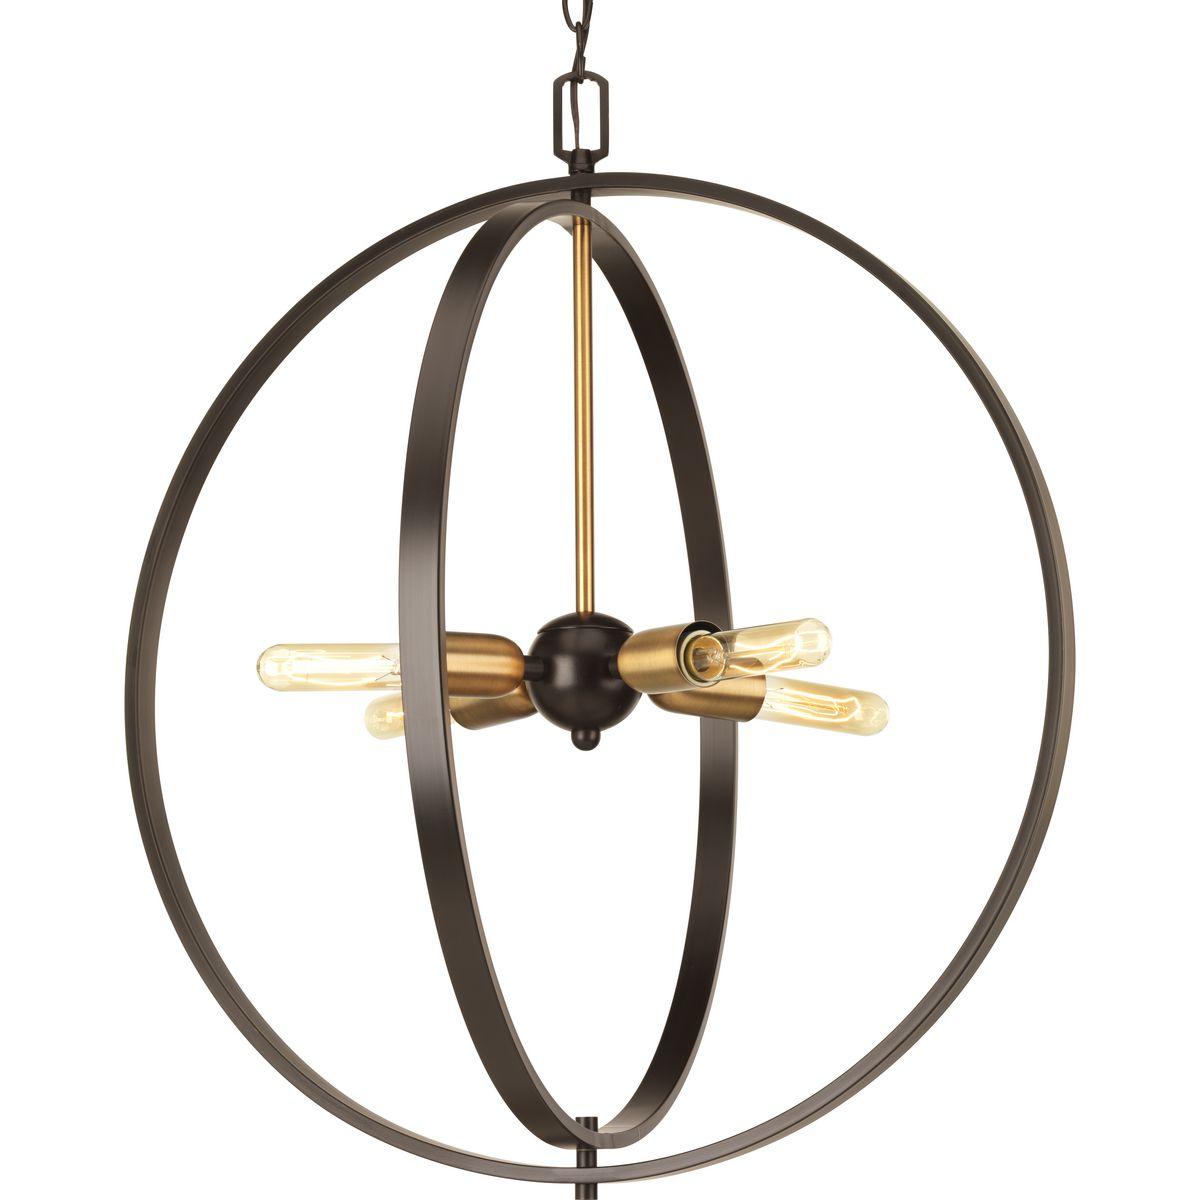 Hubbell P5191-20 The four-light sphere large pendant within the Swing Collection features mixed metal accents in an Antique Bronze finish with Vintage Brass candle holders. The vintage undertones adds style to dining rooms and kitchens.  ; Vintage electric undertones. ; M